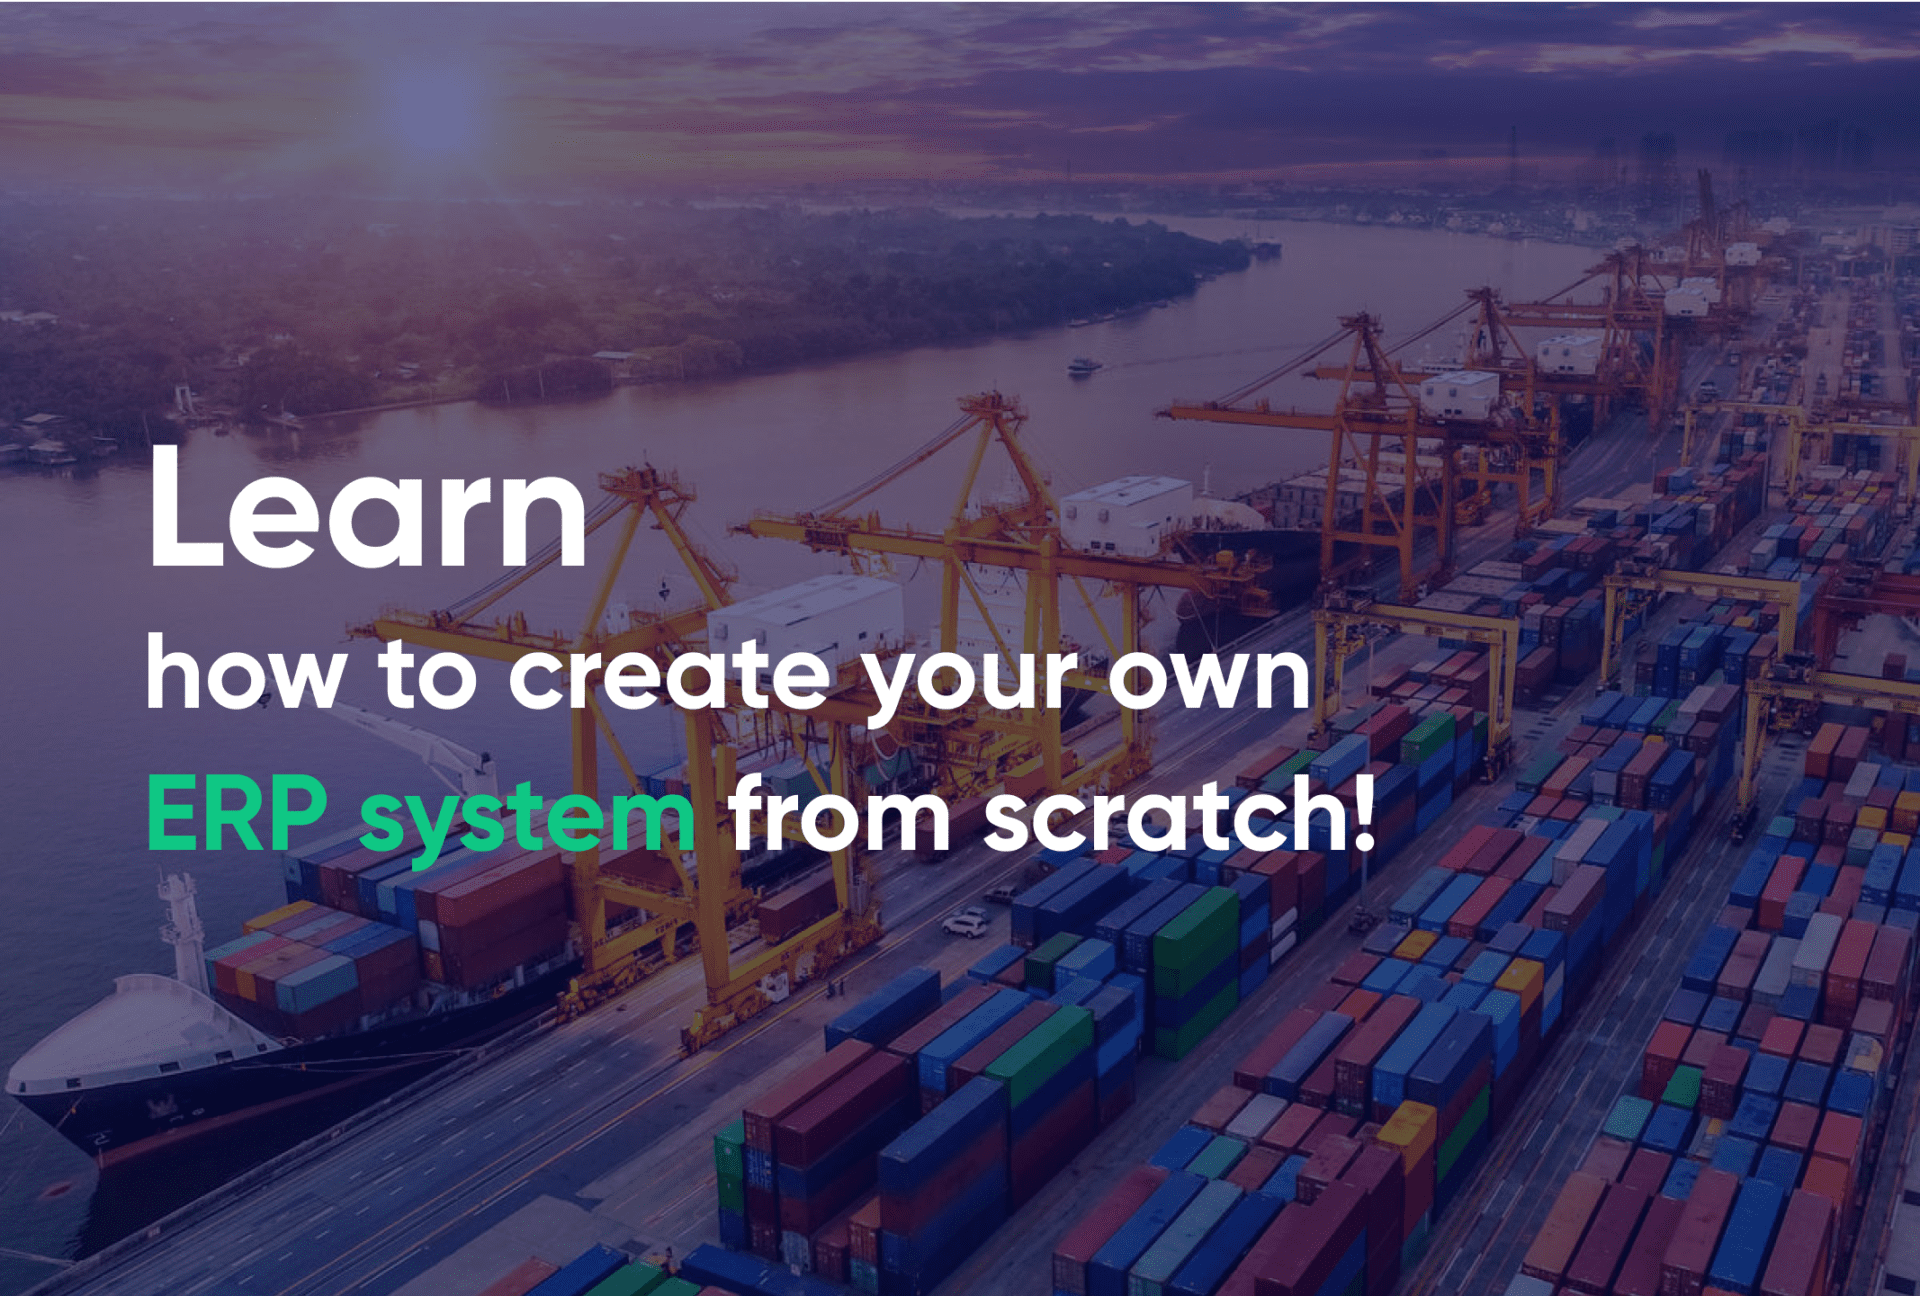 Learn how to create your own ERP system from scratch